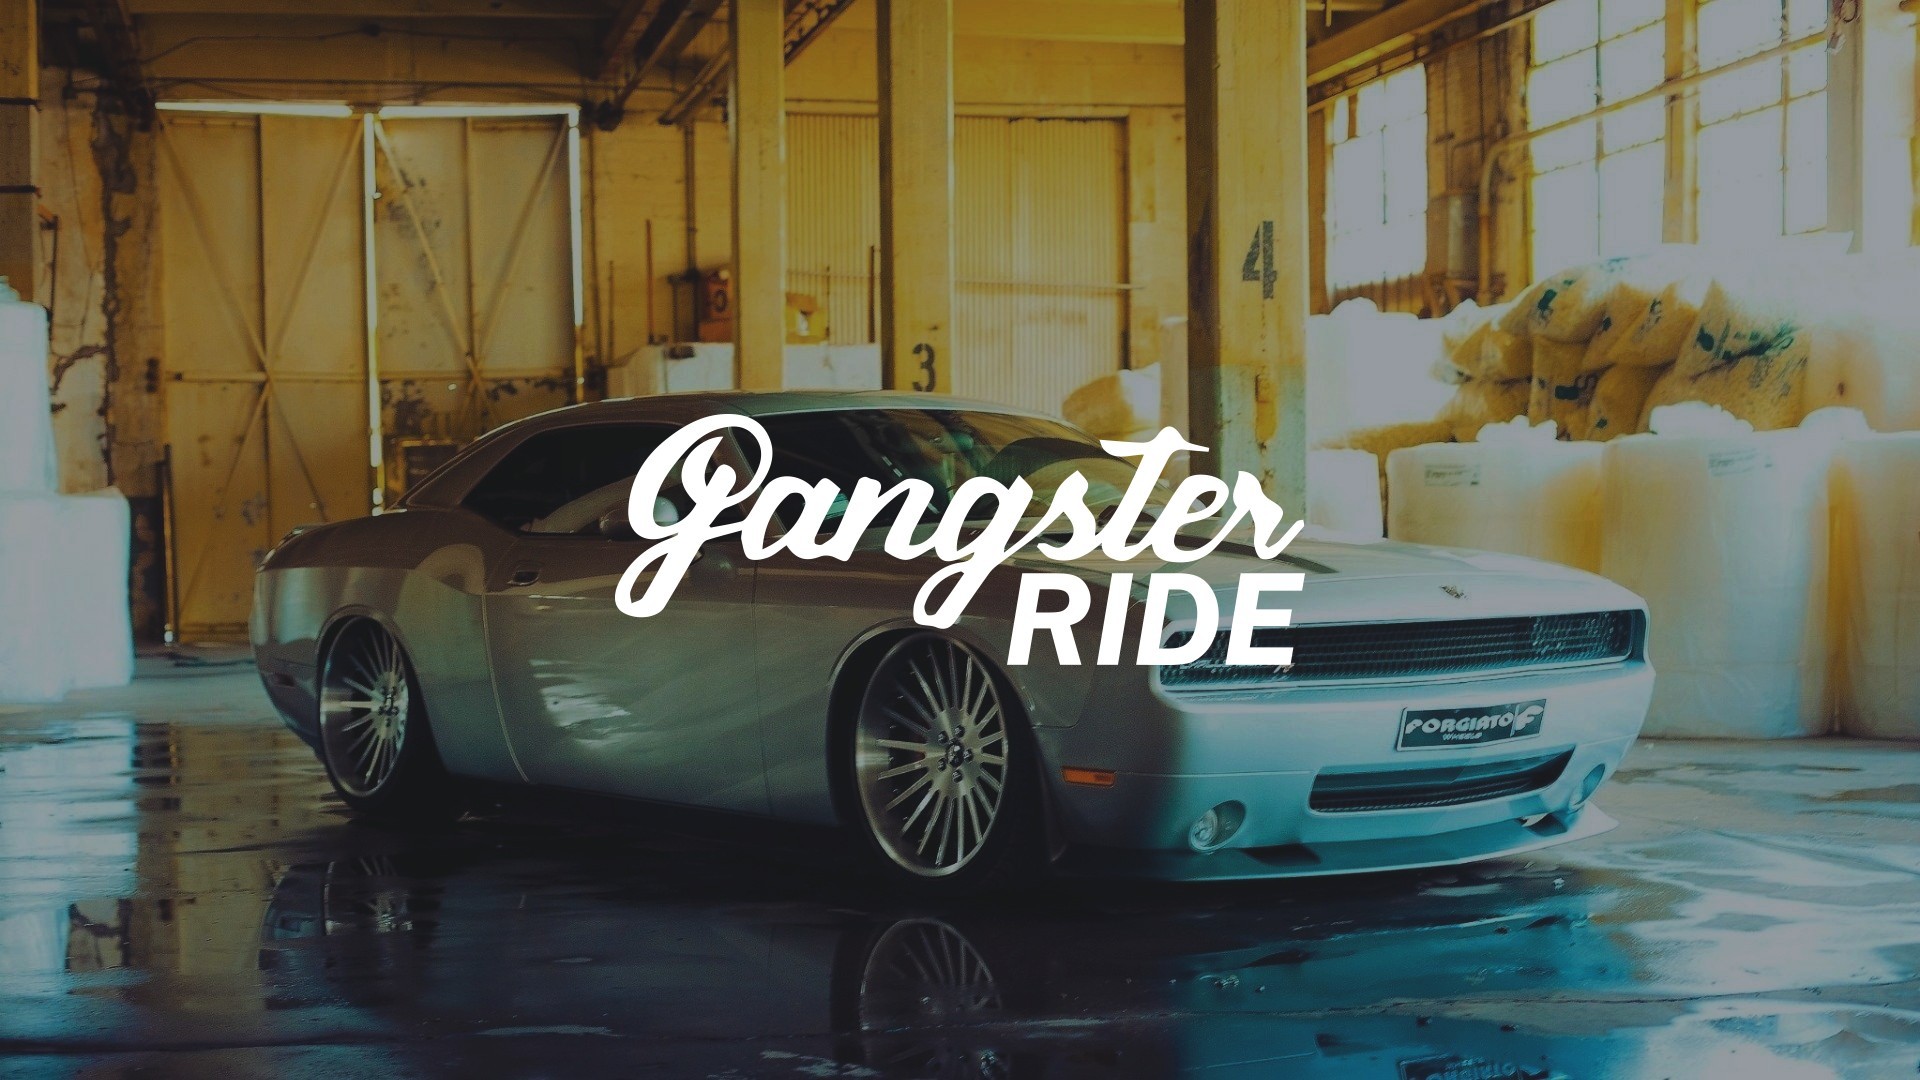 1920x1080  gangster ride car tuning lowrider colorful wallpaper and  background JPG 372 kB